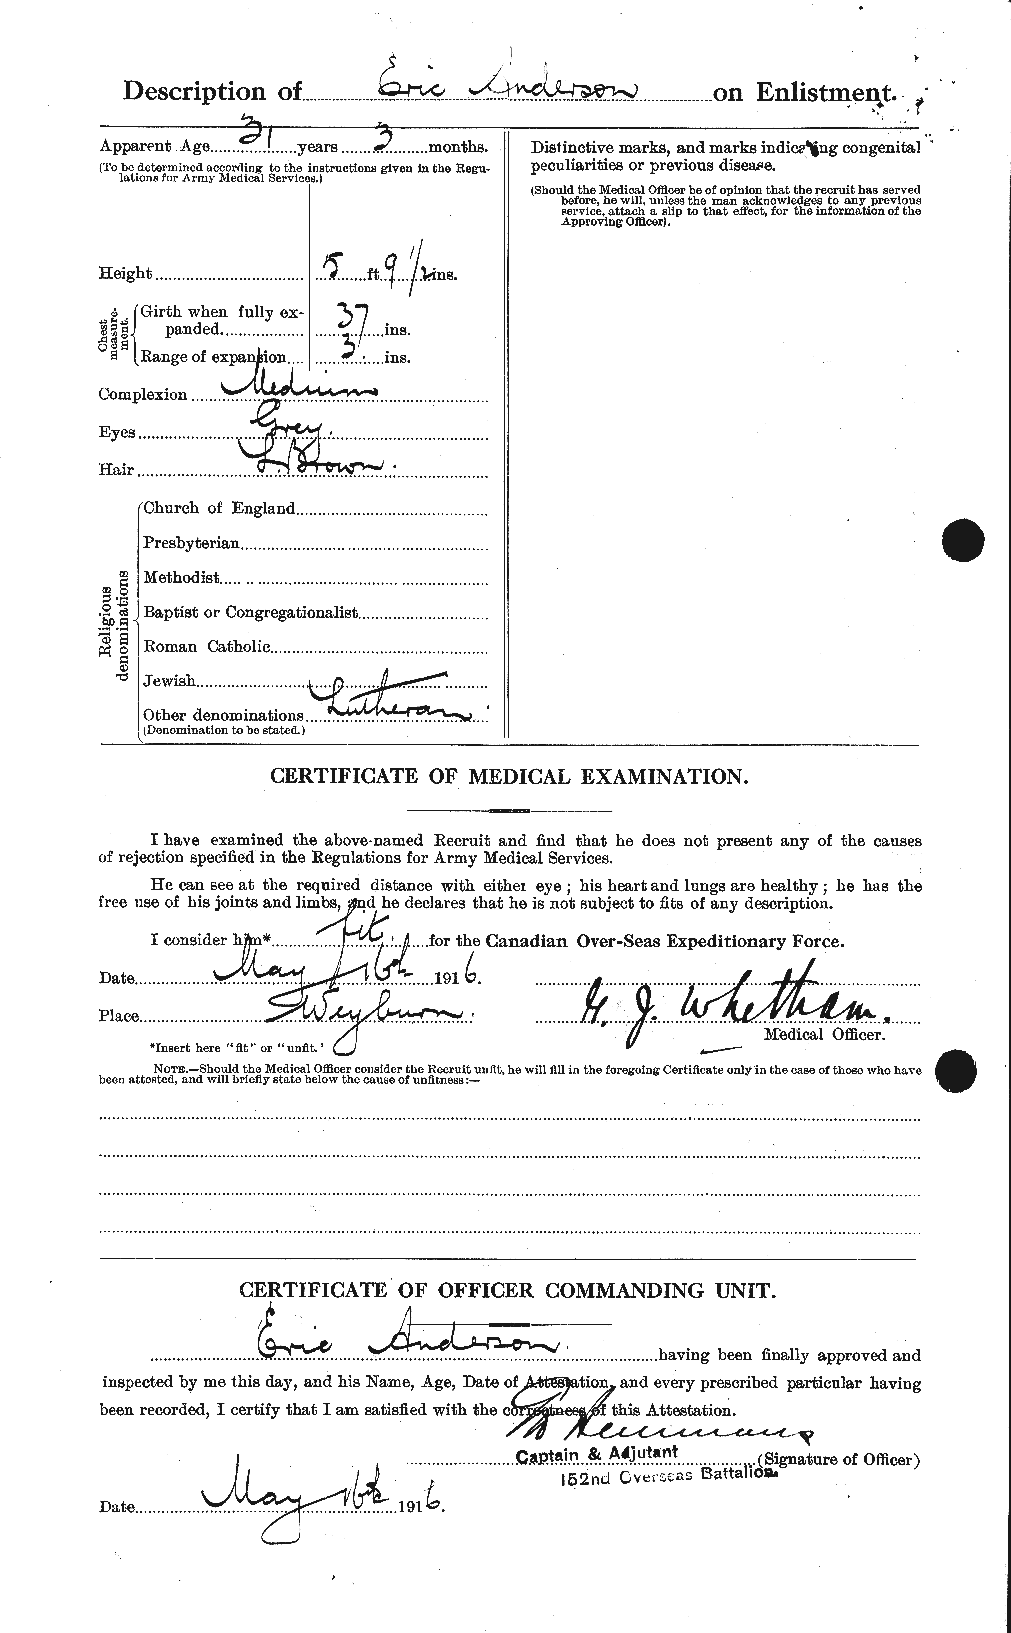 Personnel Records of the First World War - CEF 209899b